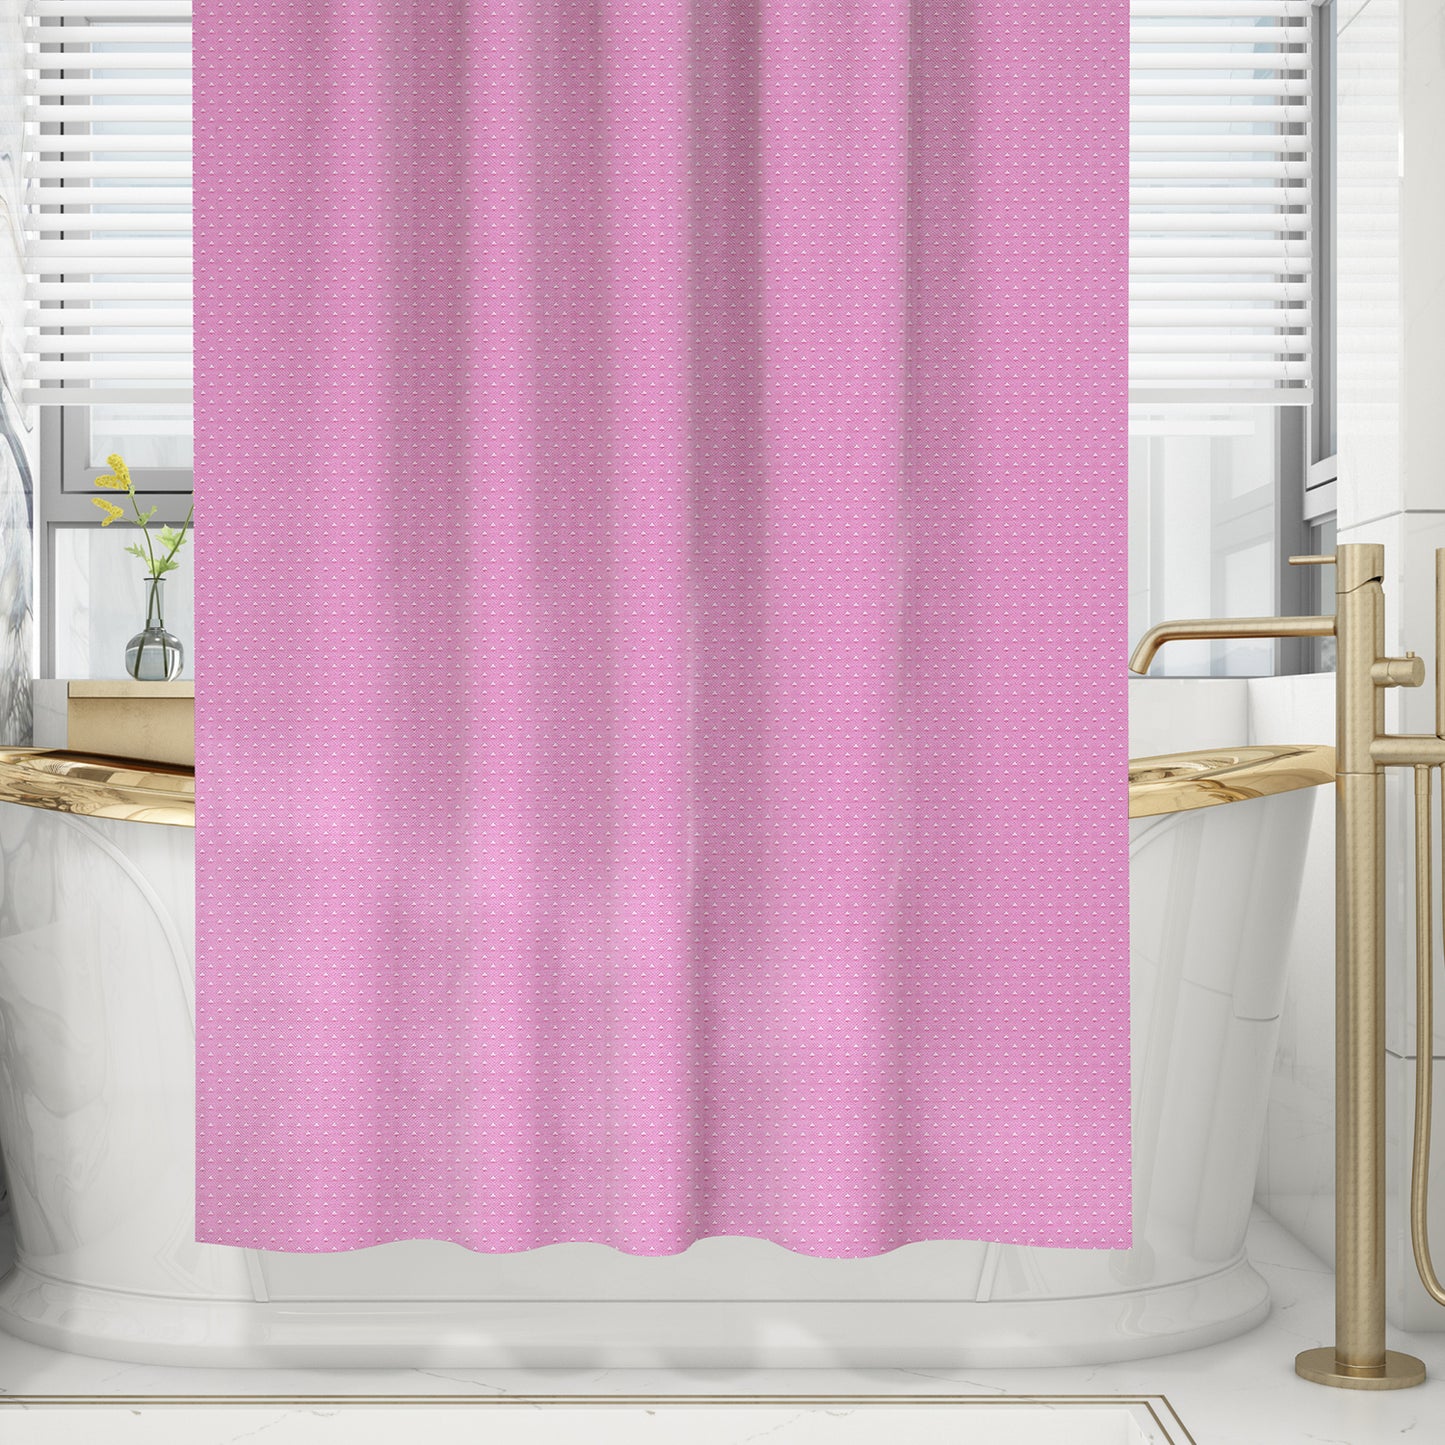  shower pink curtains